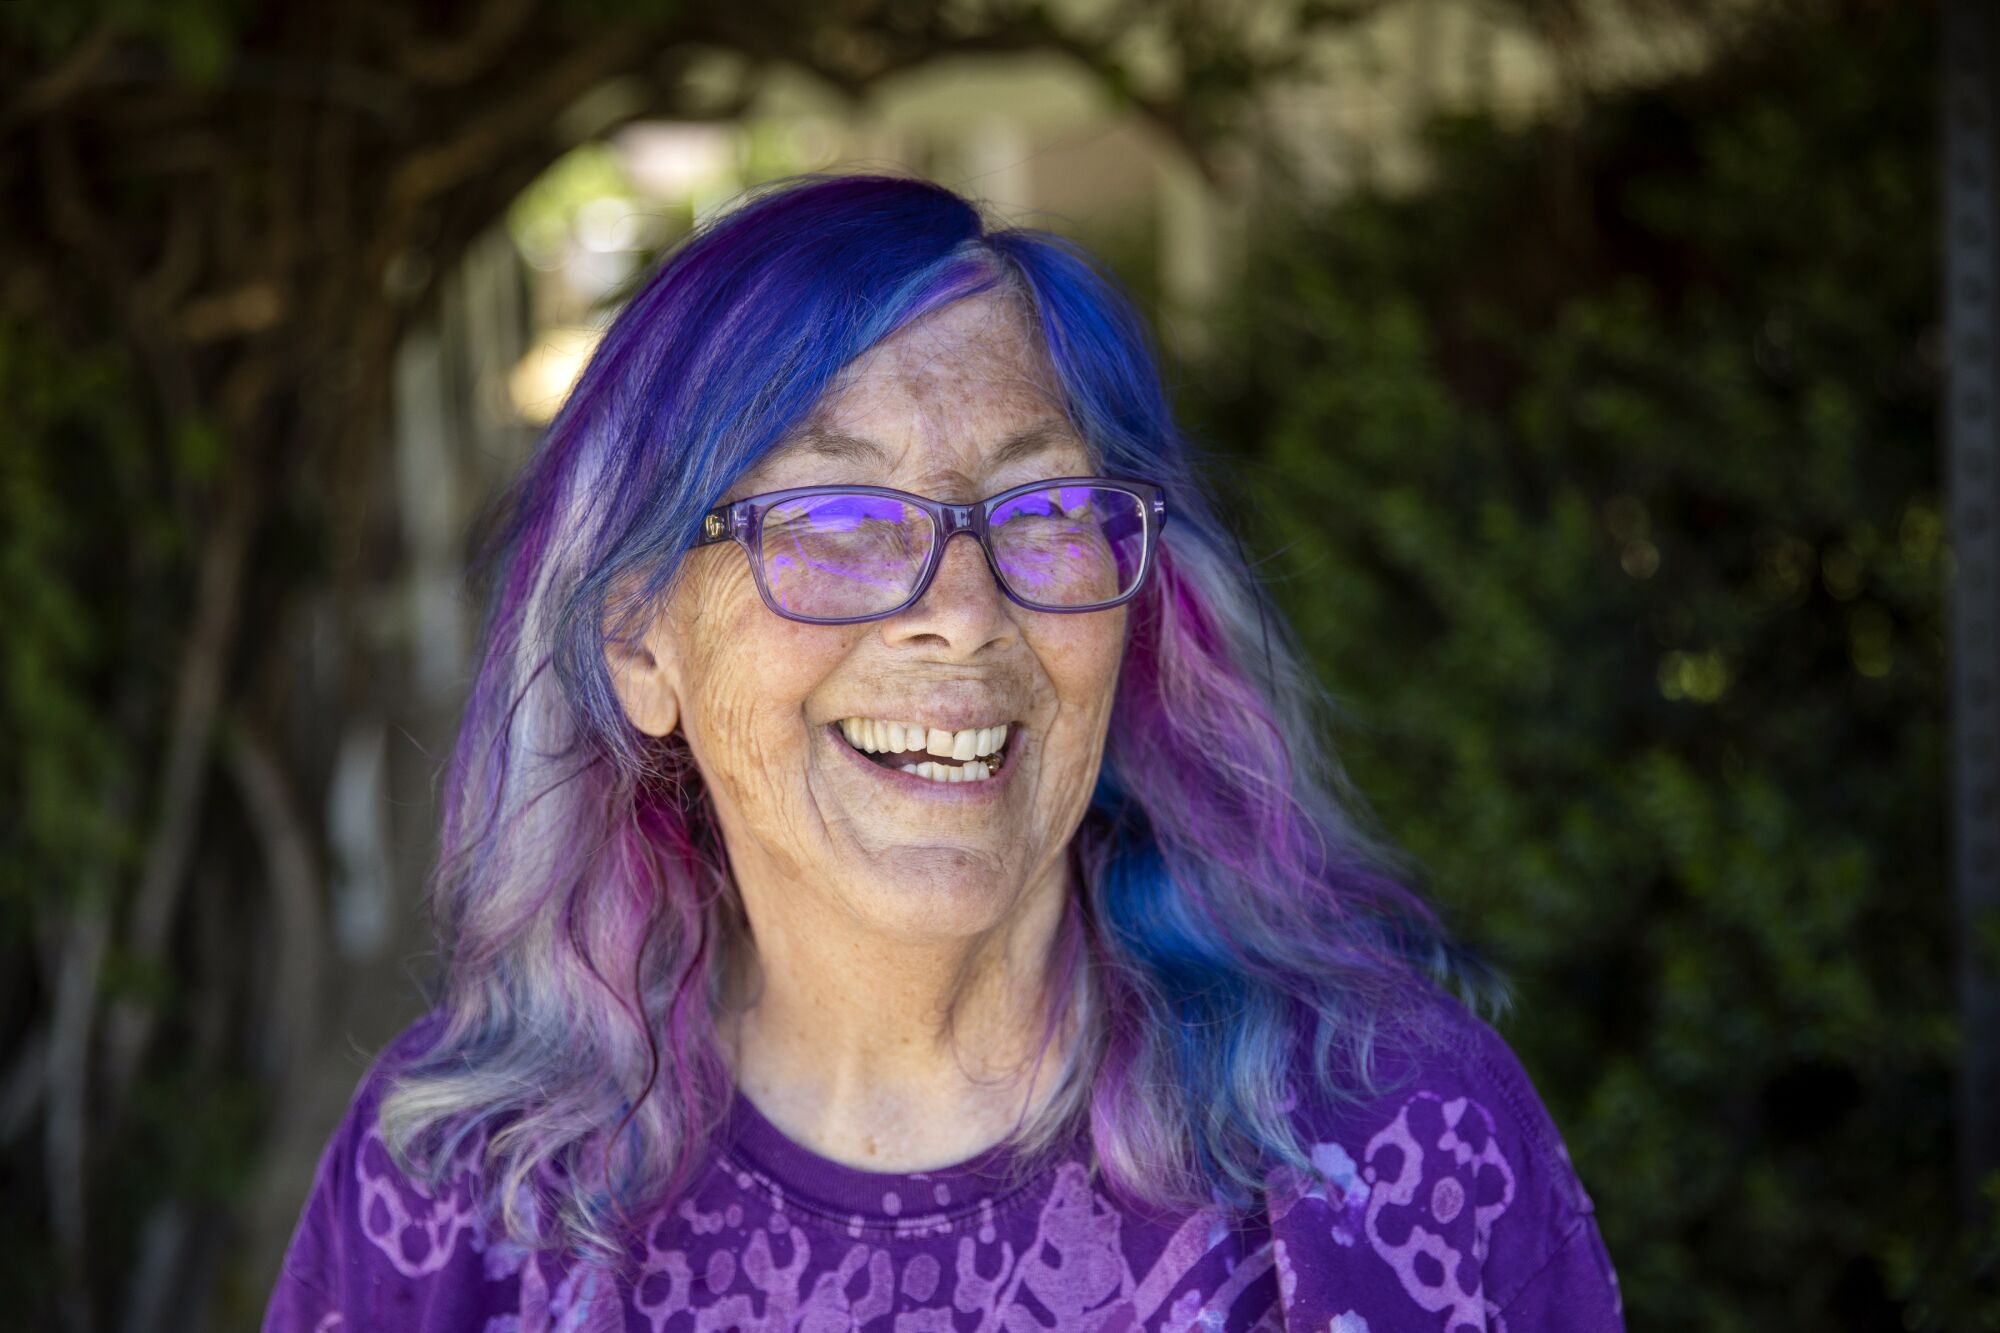 A smiling woman with purple hair, wearing a purple shirt.